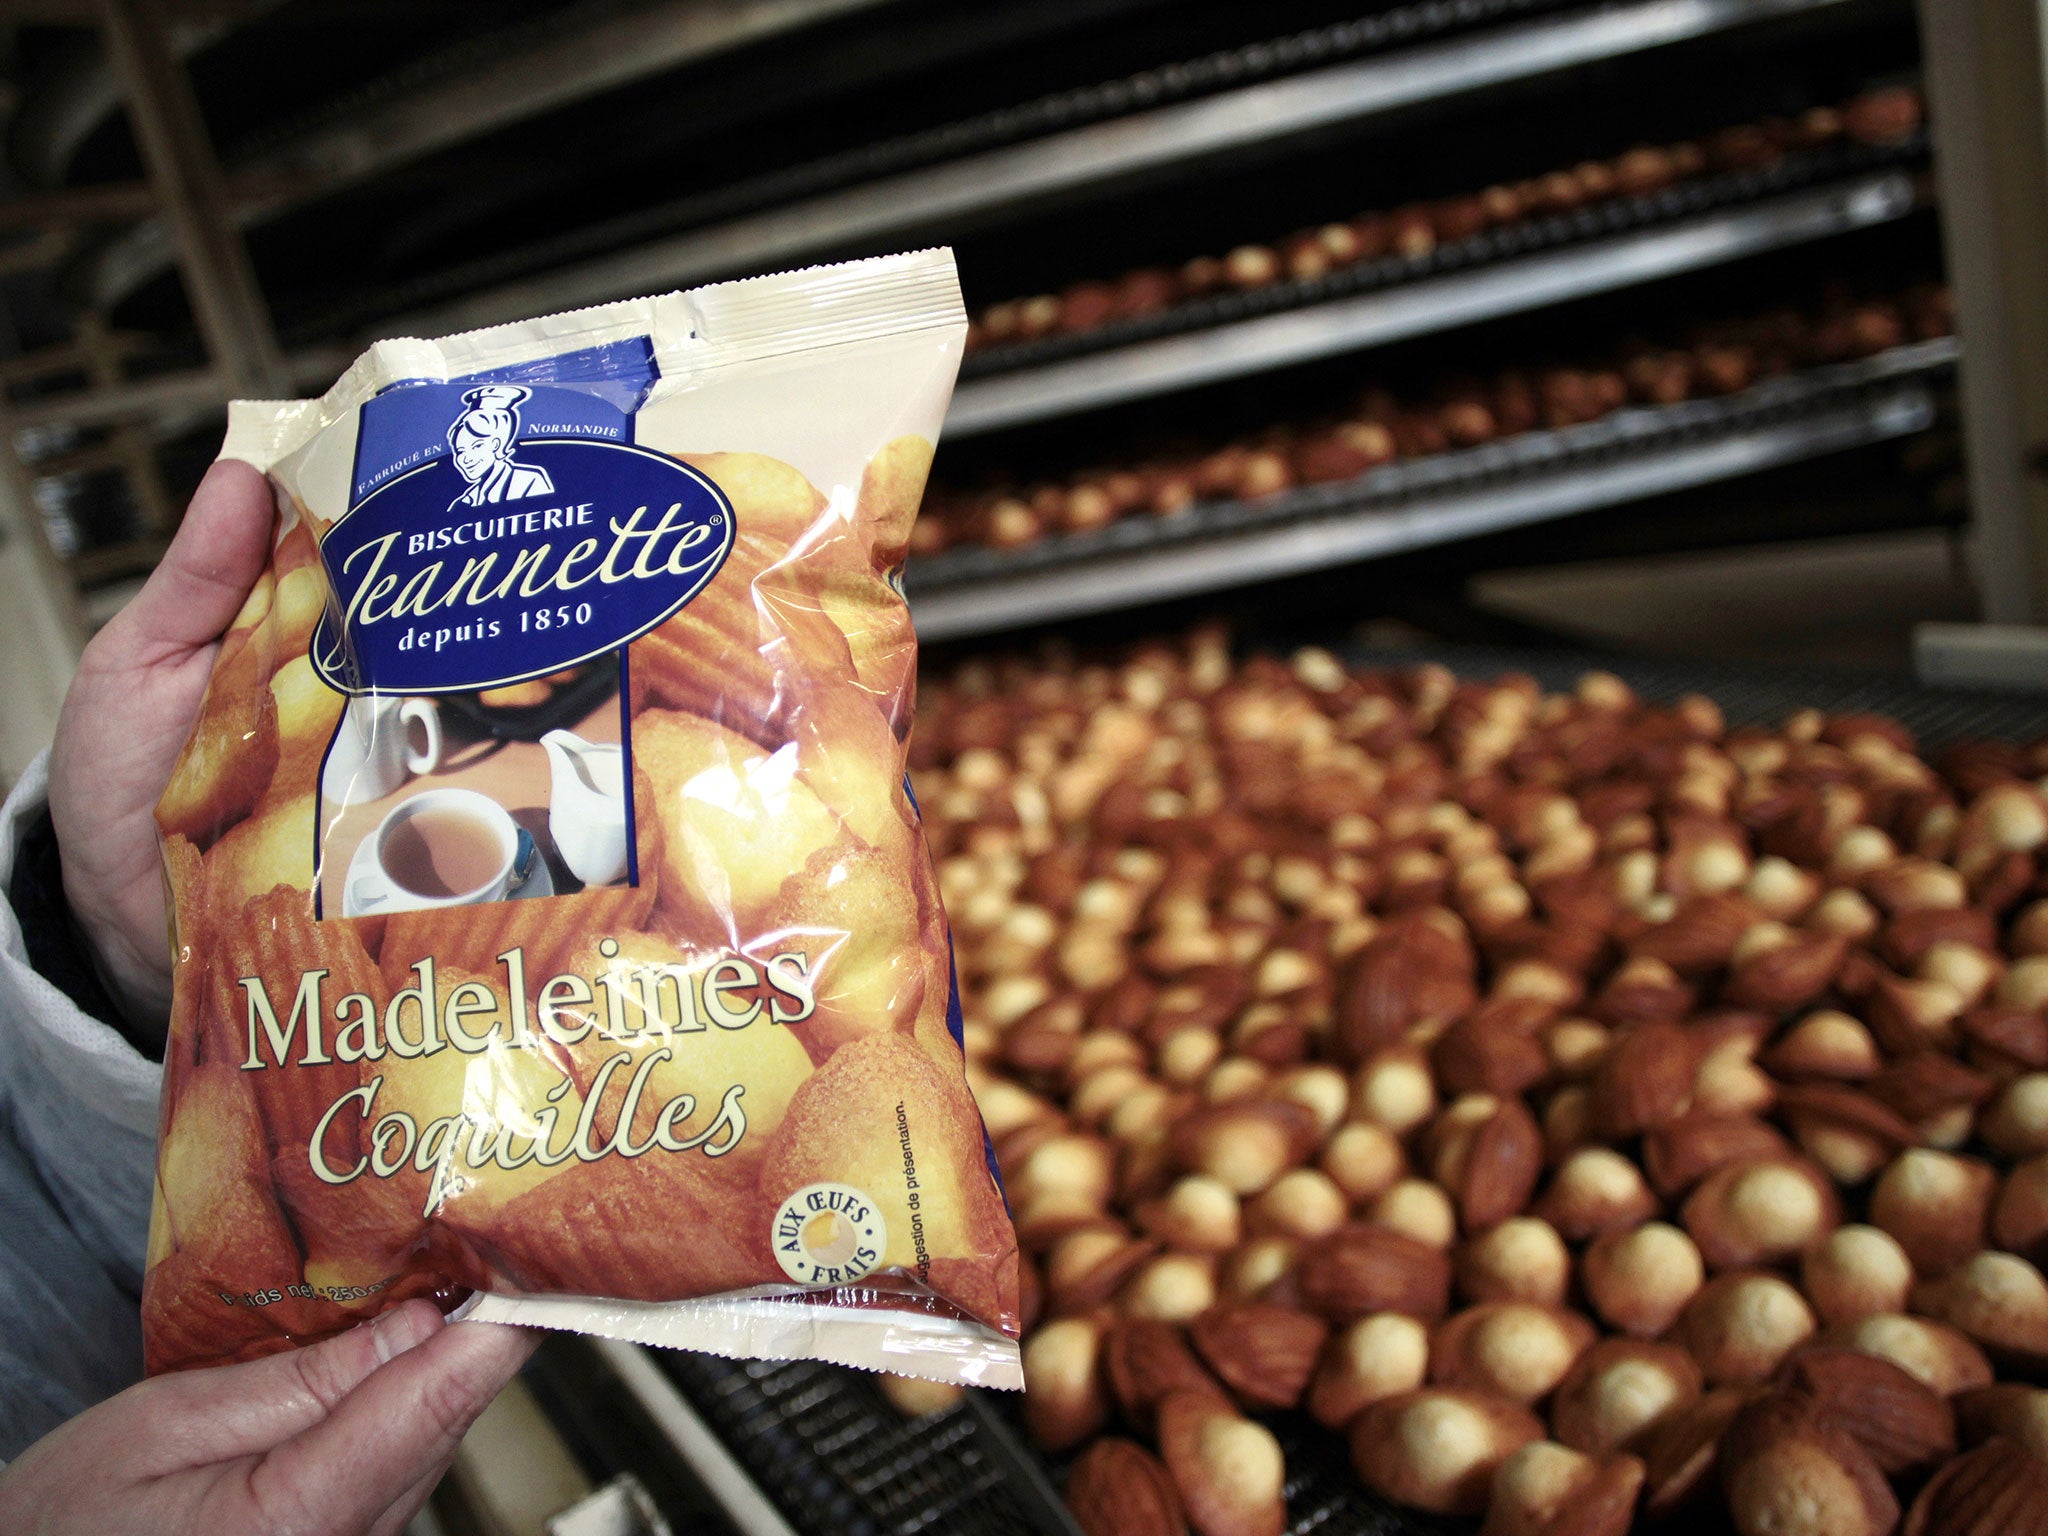 An employee of the Jeannette factory displays a packet as he supervises the production of madeleines as they occupy their plant, on March 19, 2013 in Caen, northwestern France.